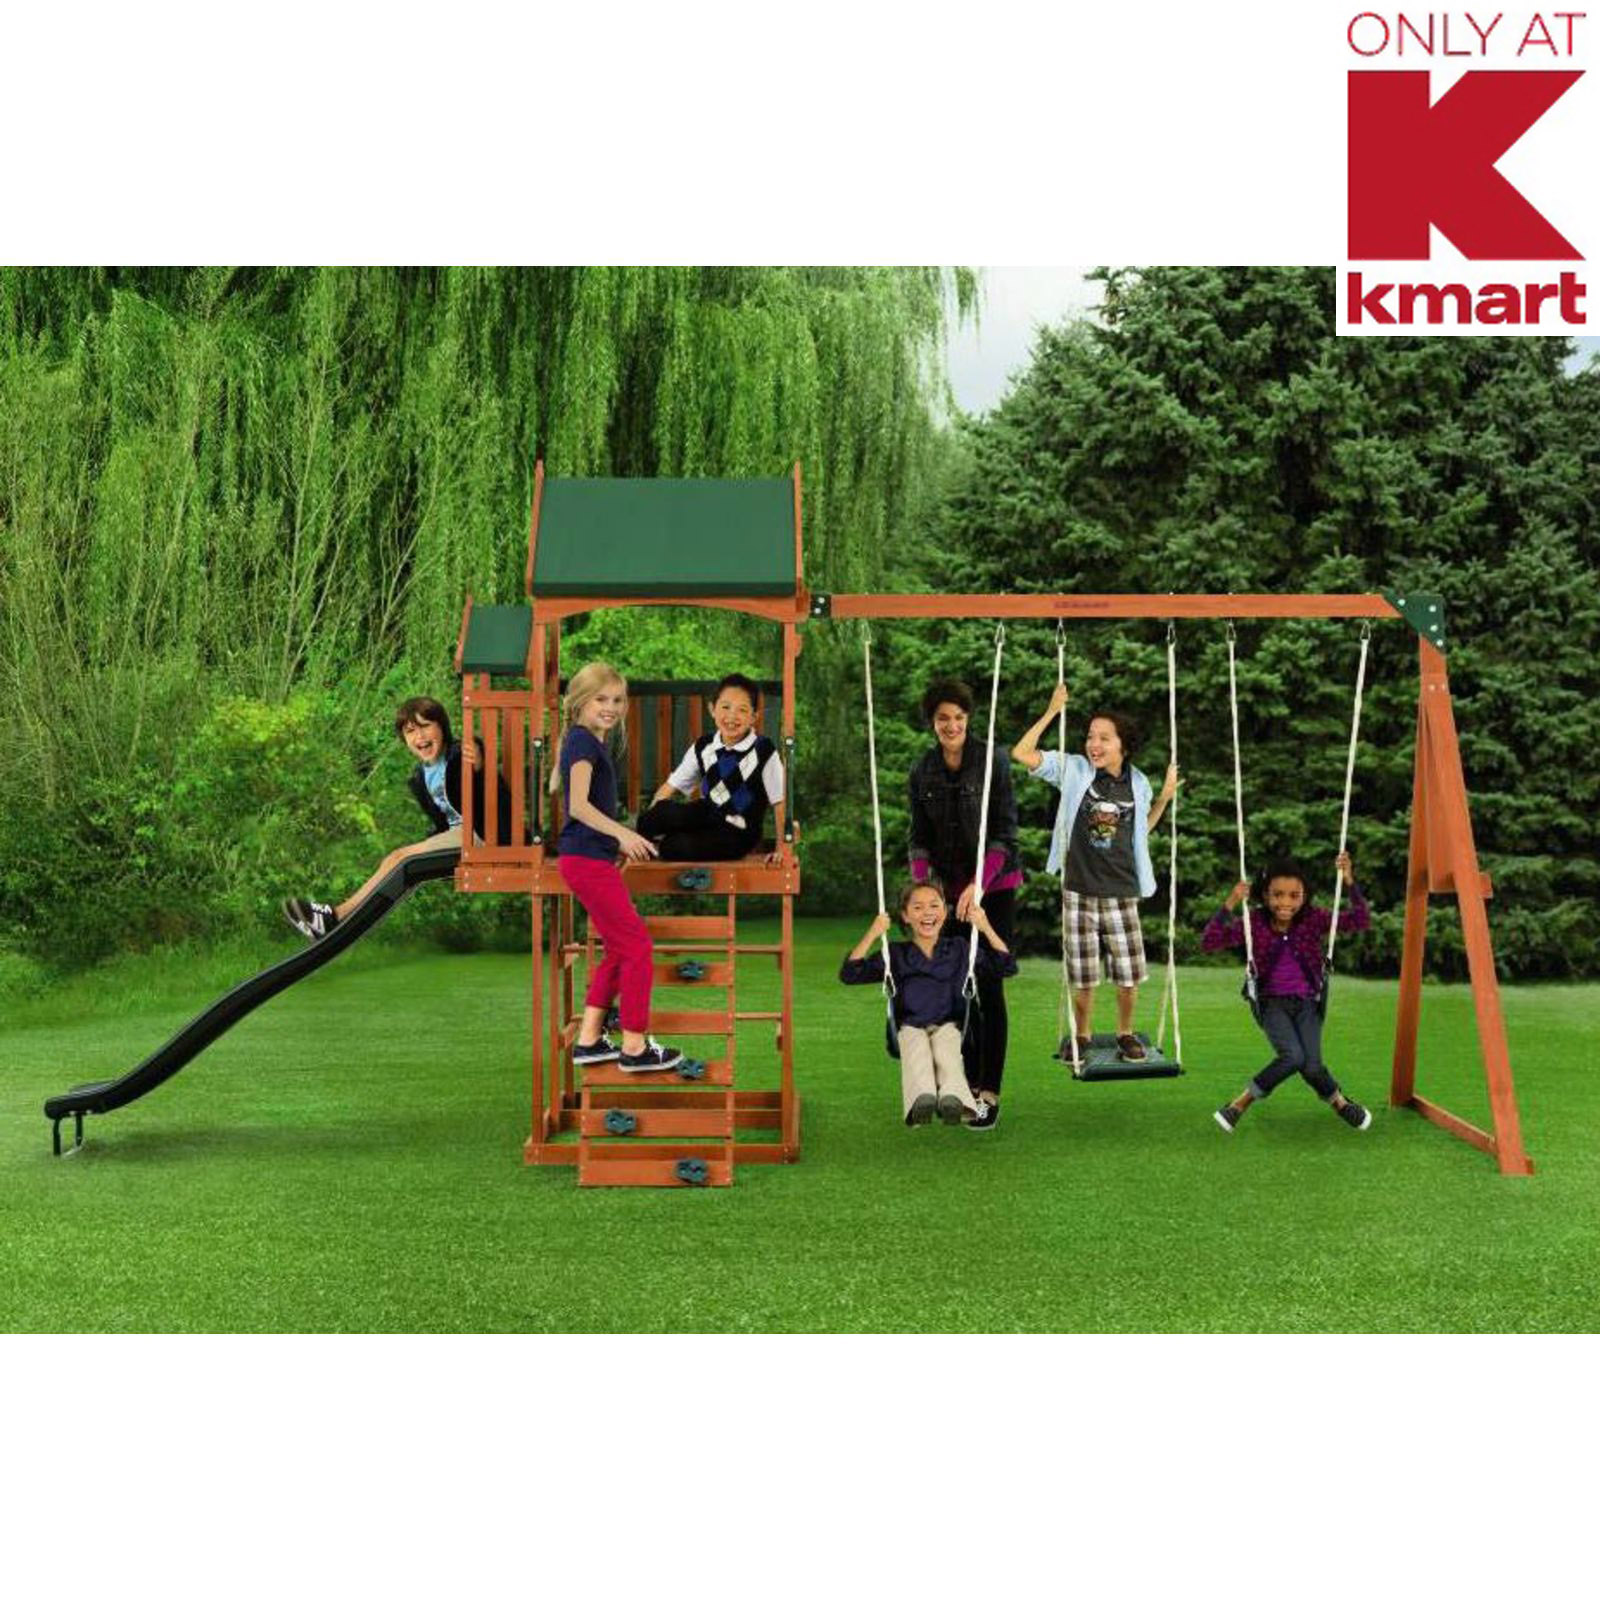 Outdoor Living Outdoor Play Swing Sets & Accessories 65